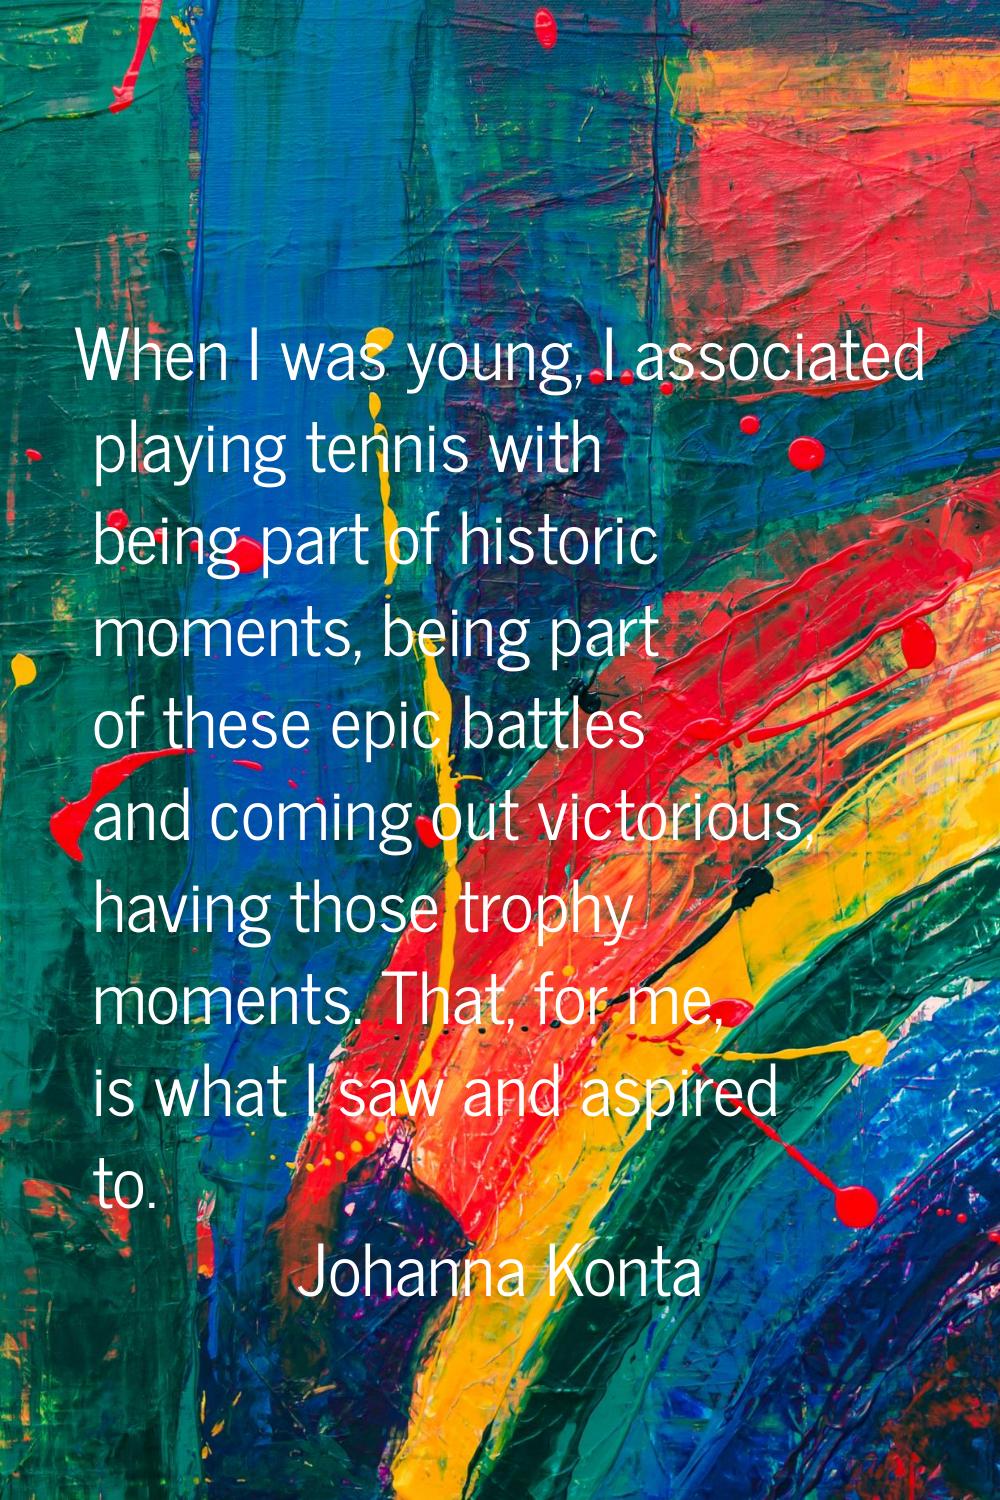 When I was young, I associated playing tennis with being part of historic moments, being part of th